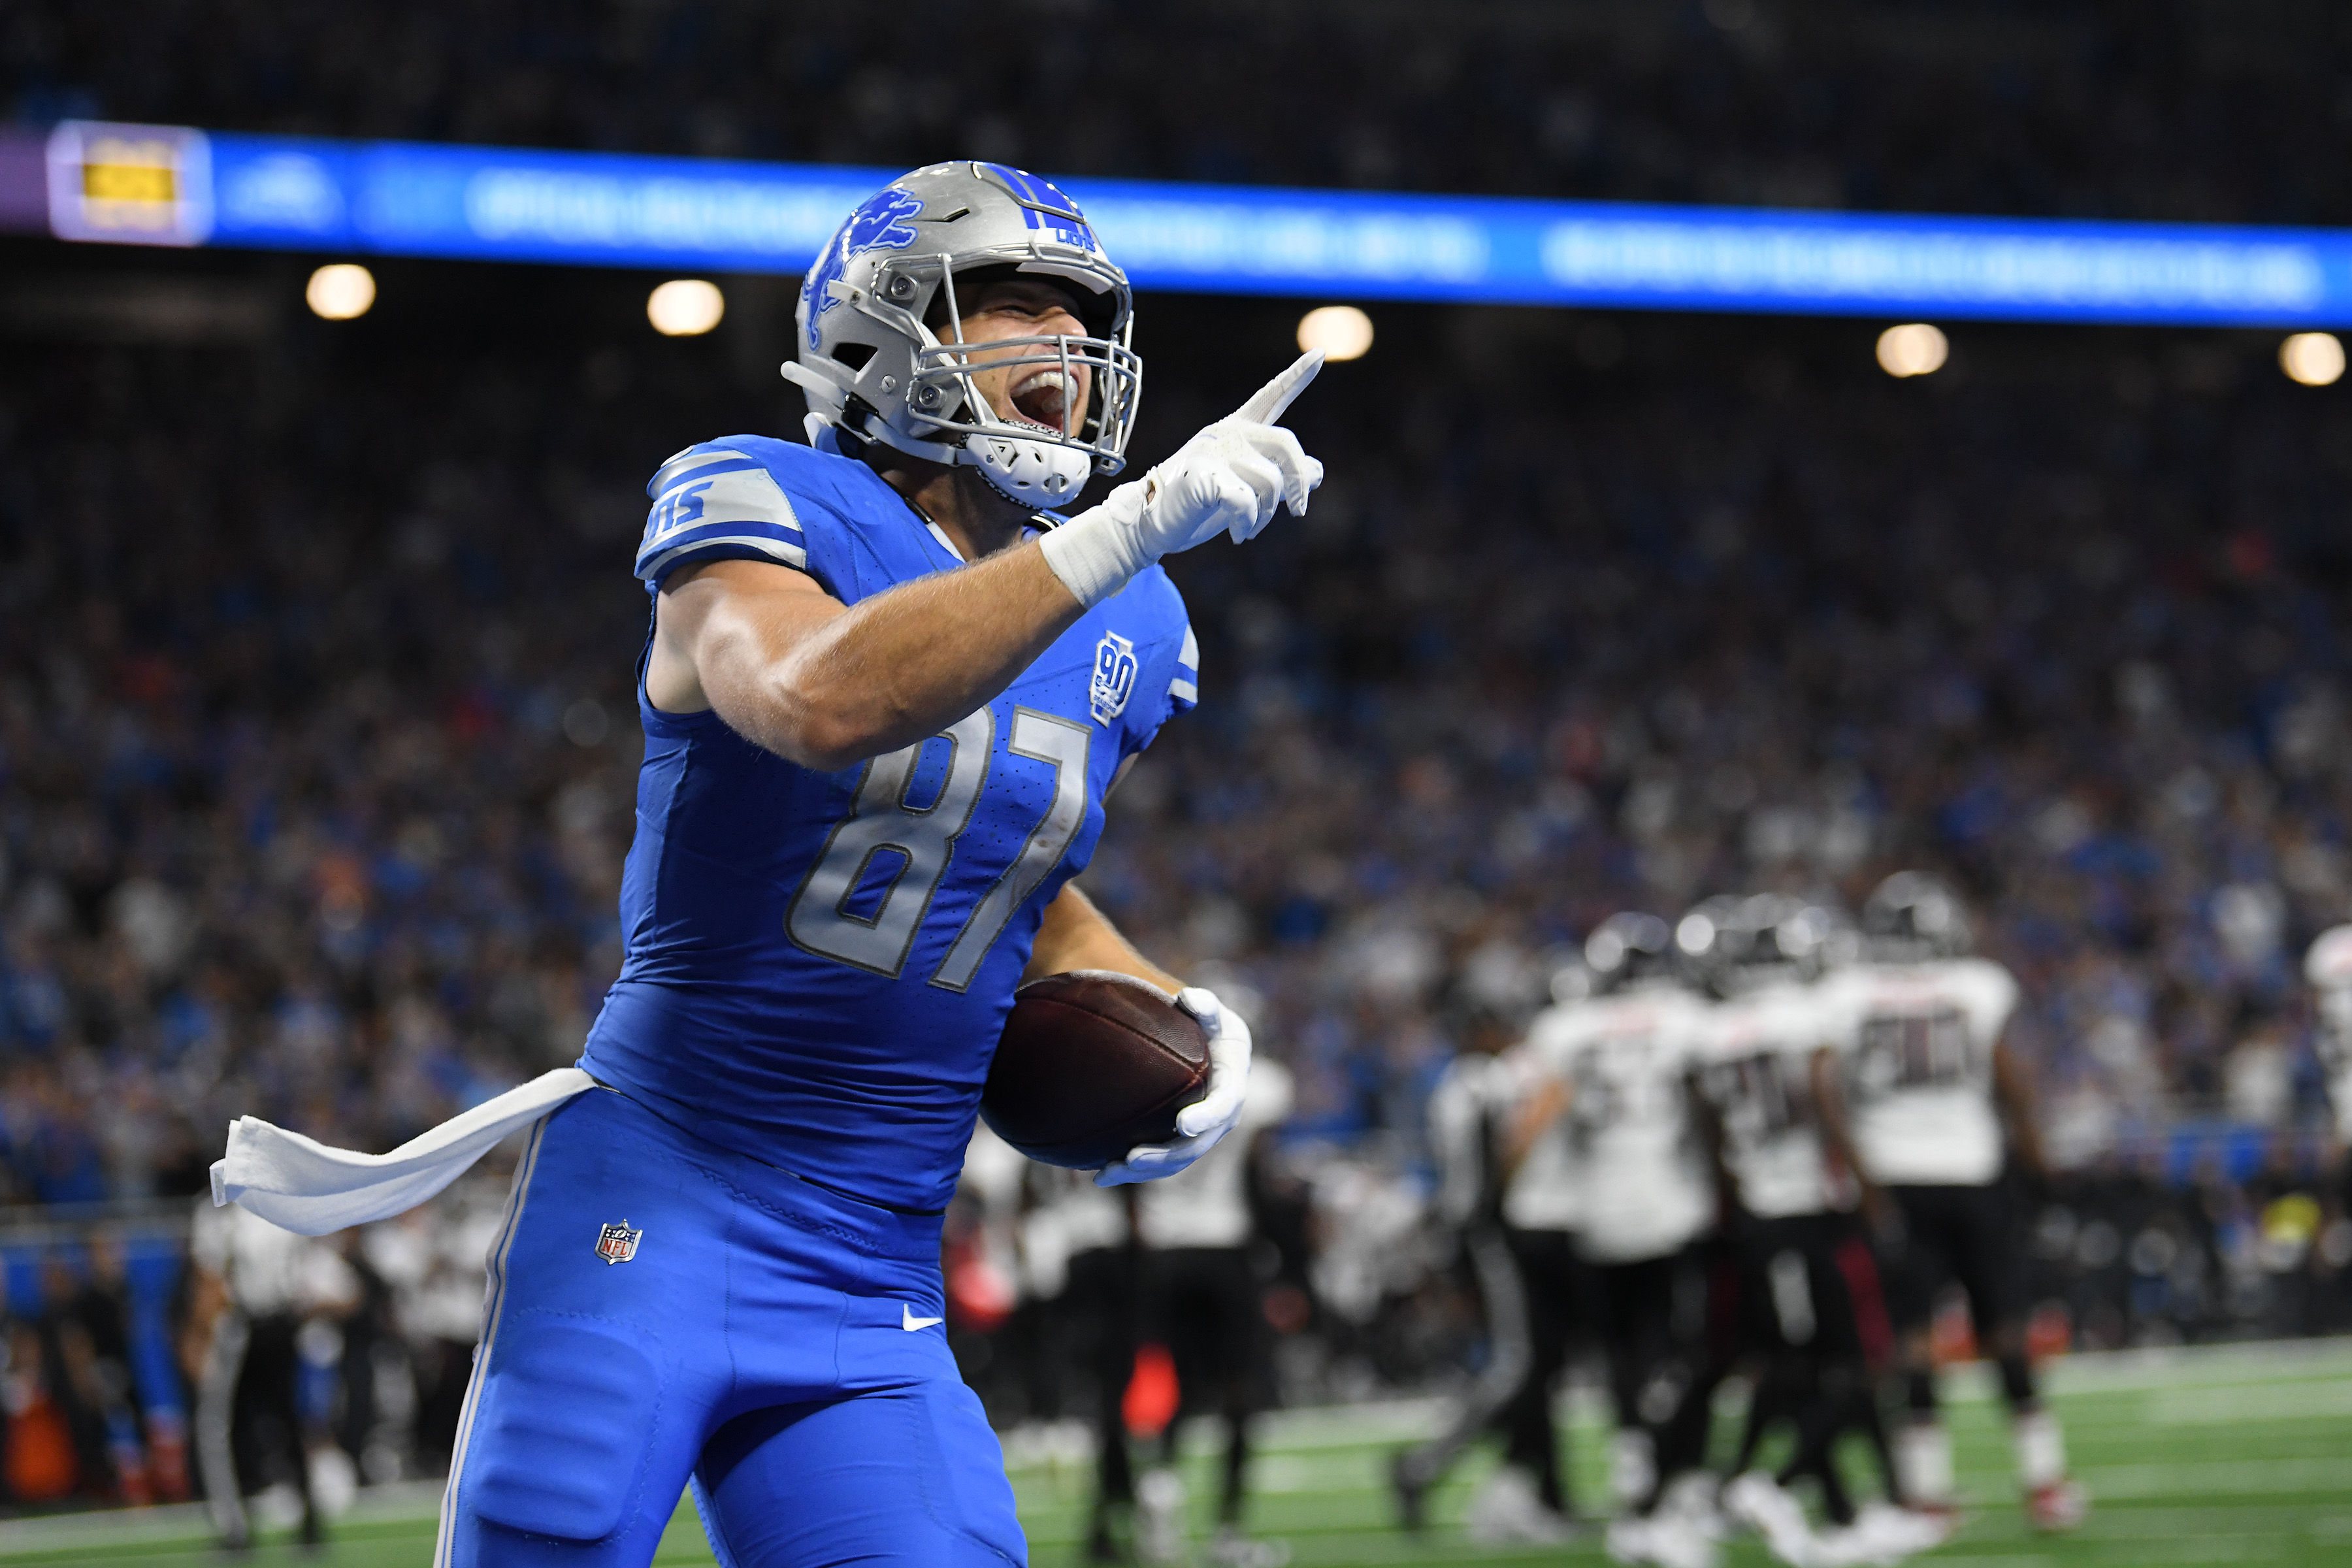 Detroit Lions tight end Sam LaPorta (87) celebrates after catching a touchdown pass against the Atlanta Falcons in the second quarter at Ford Field.&nbsp;